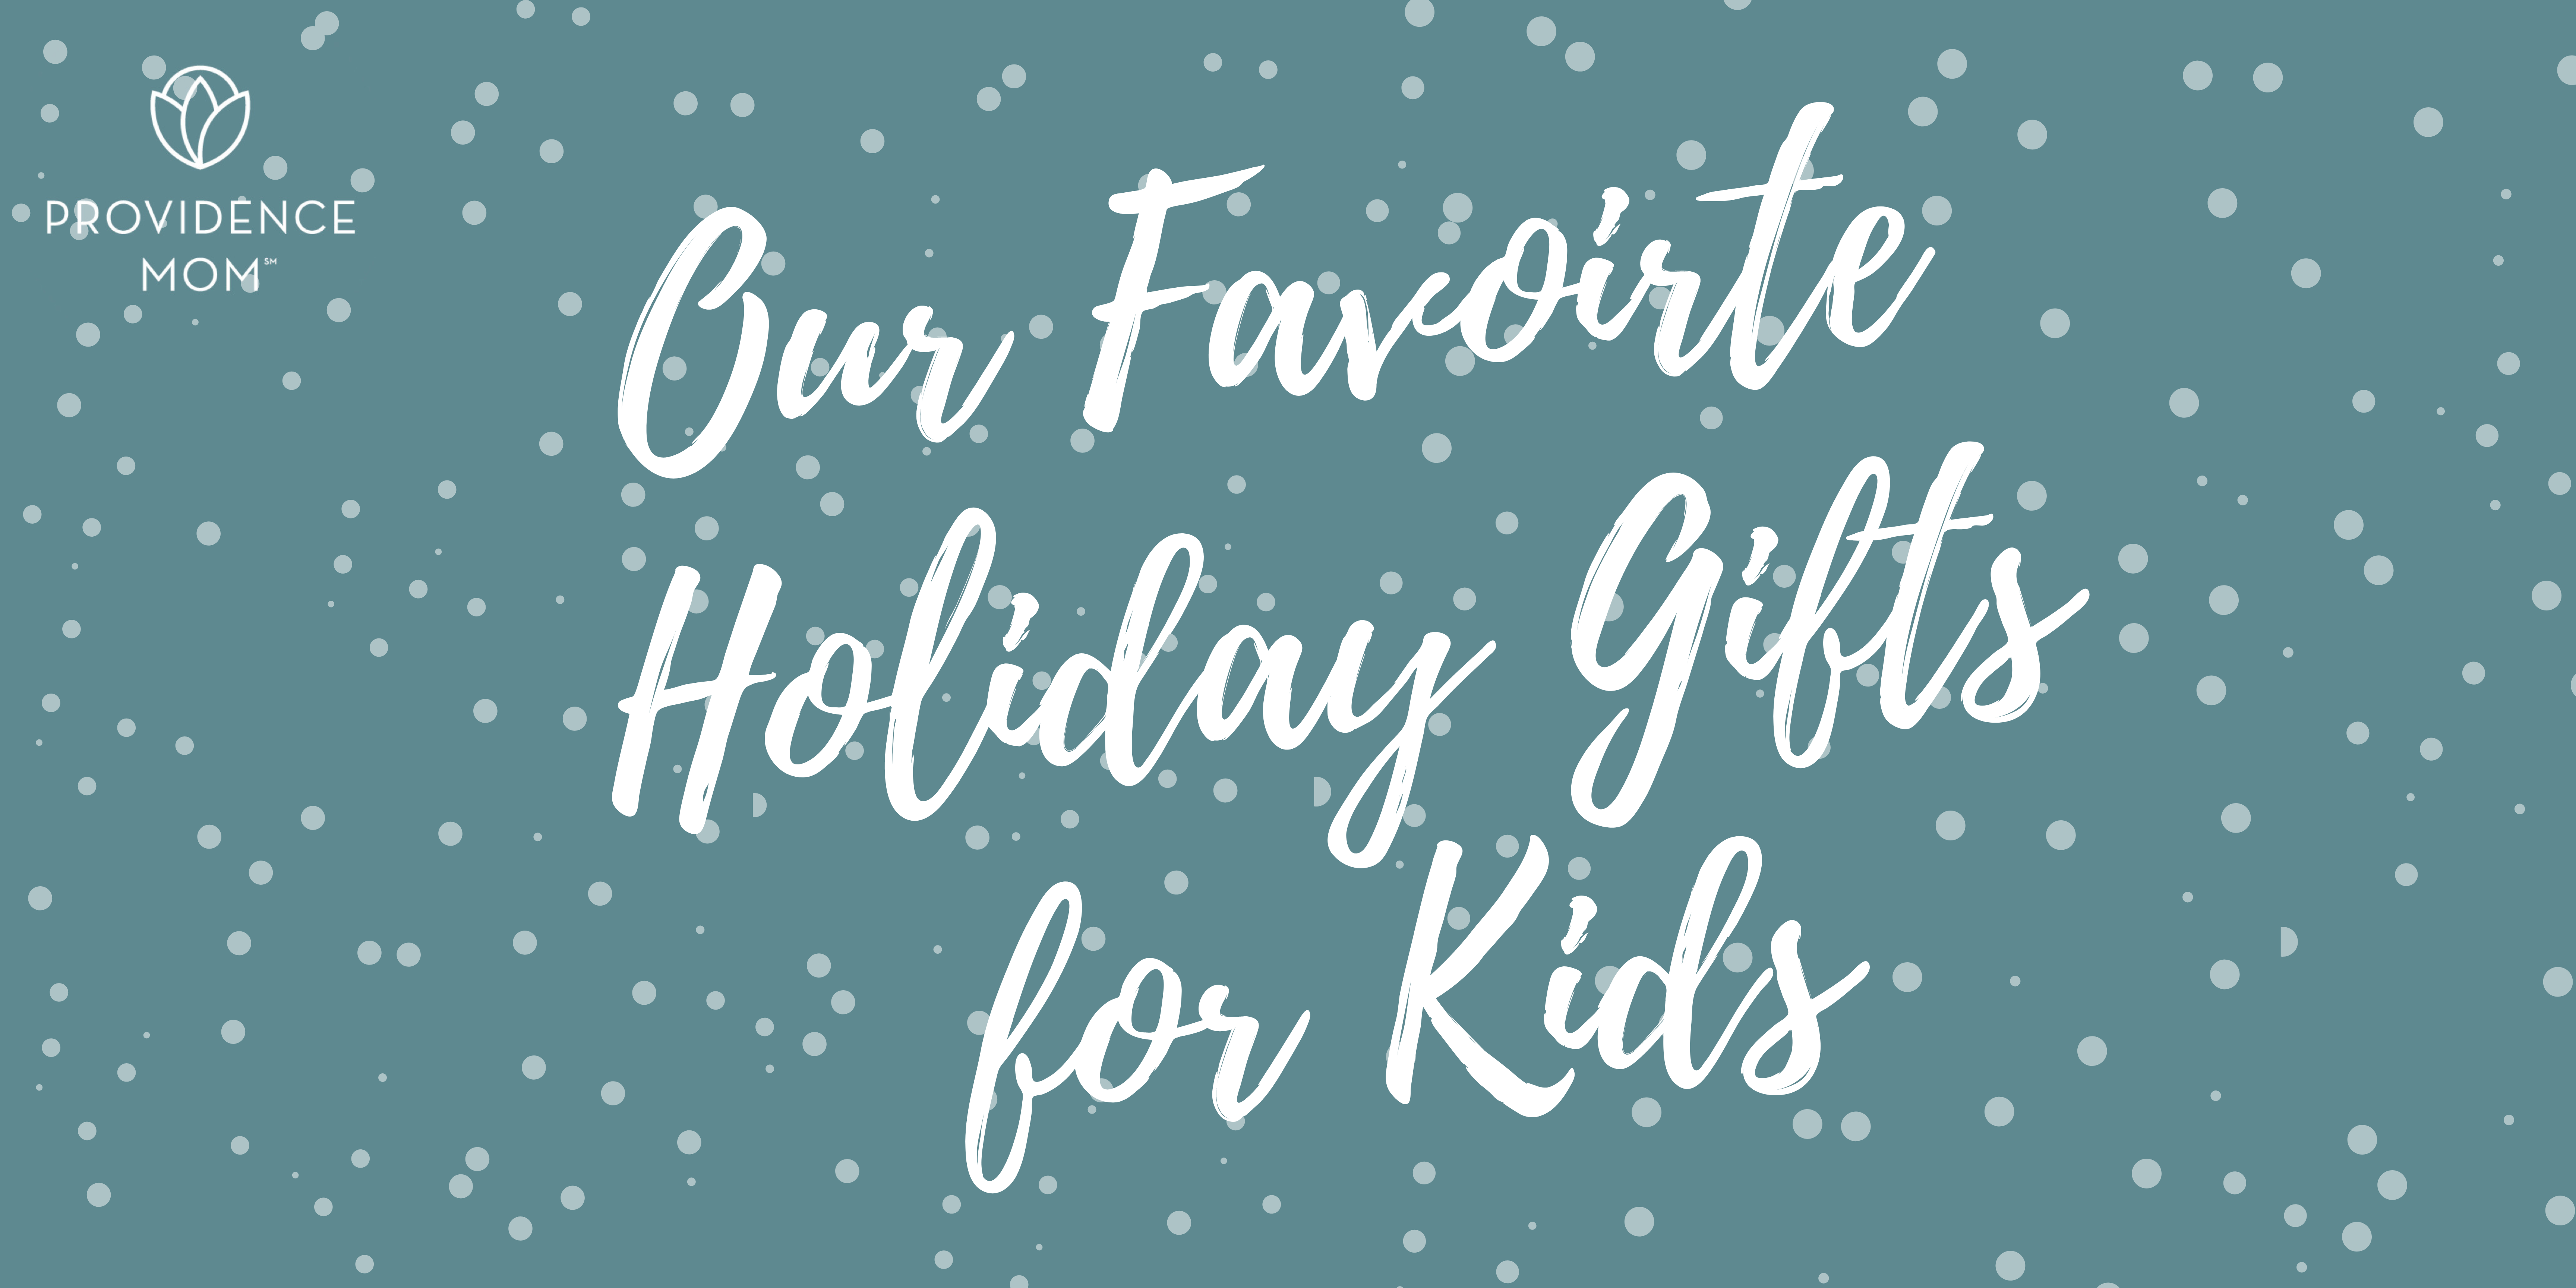 Mom's favorite holiday gifts for kids